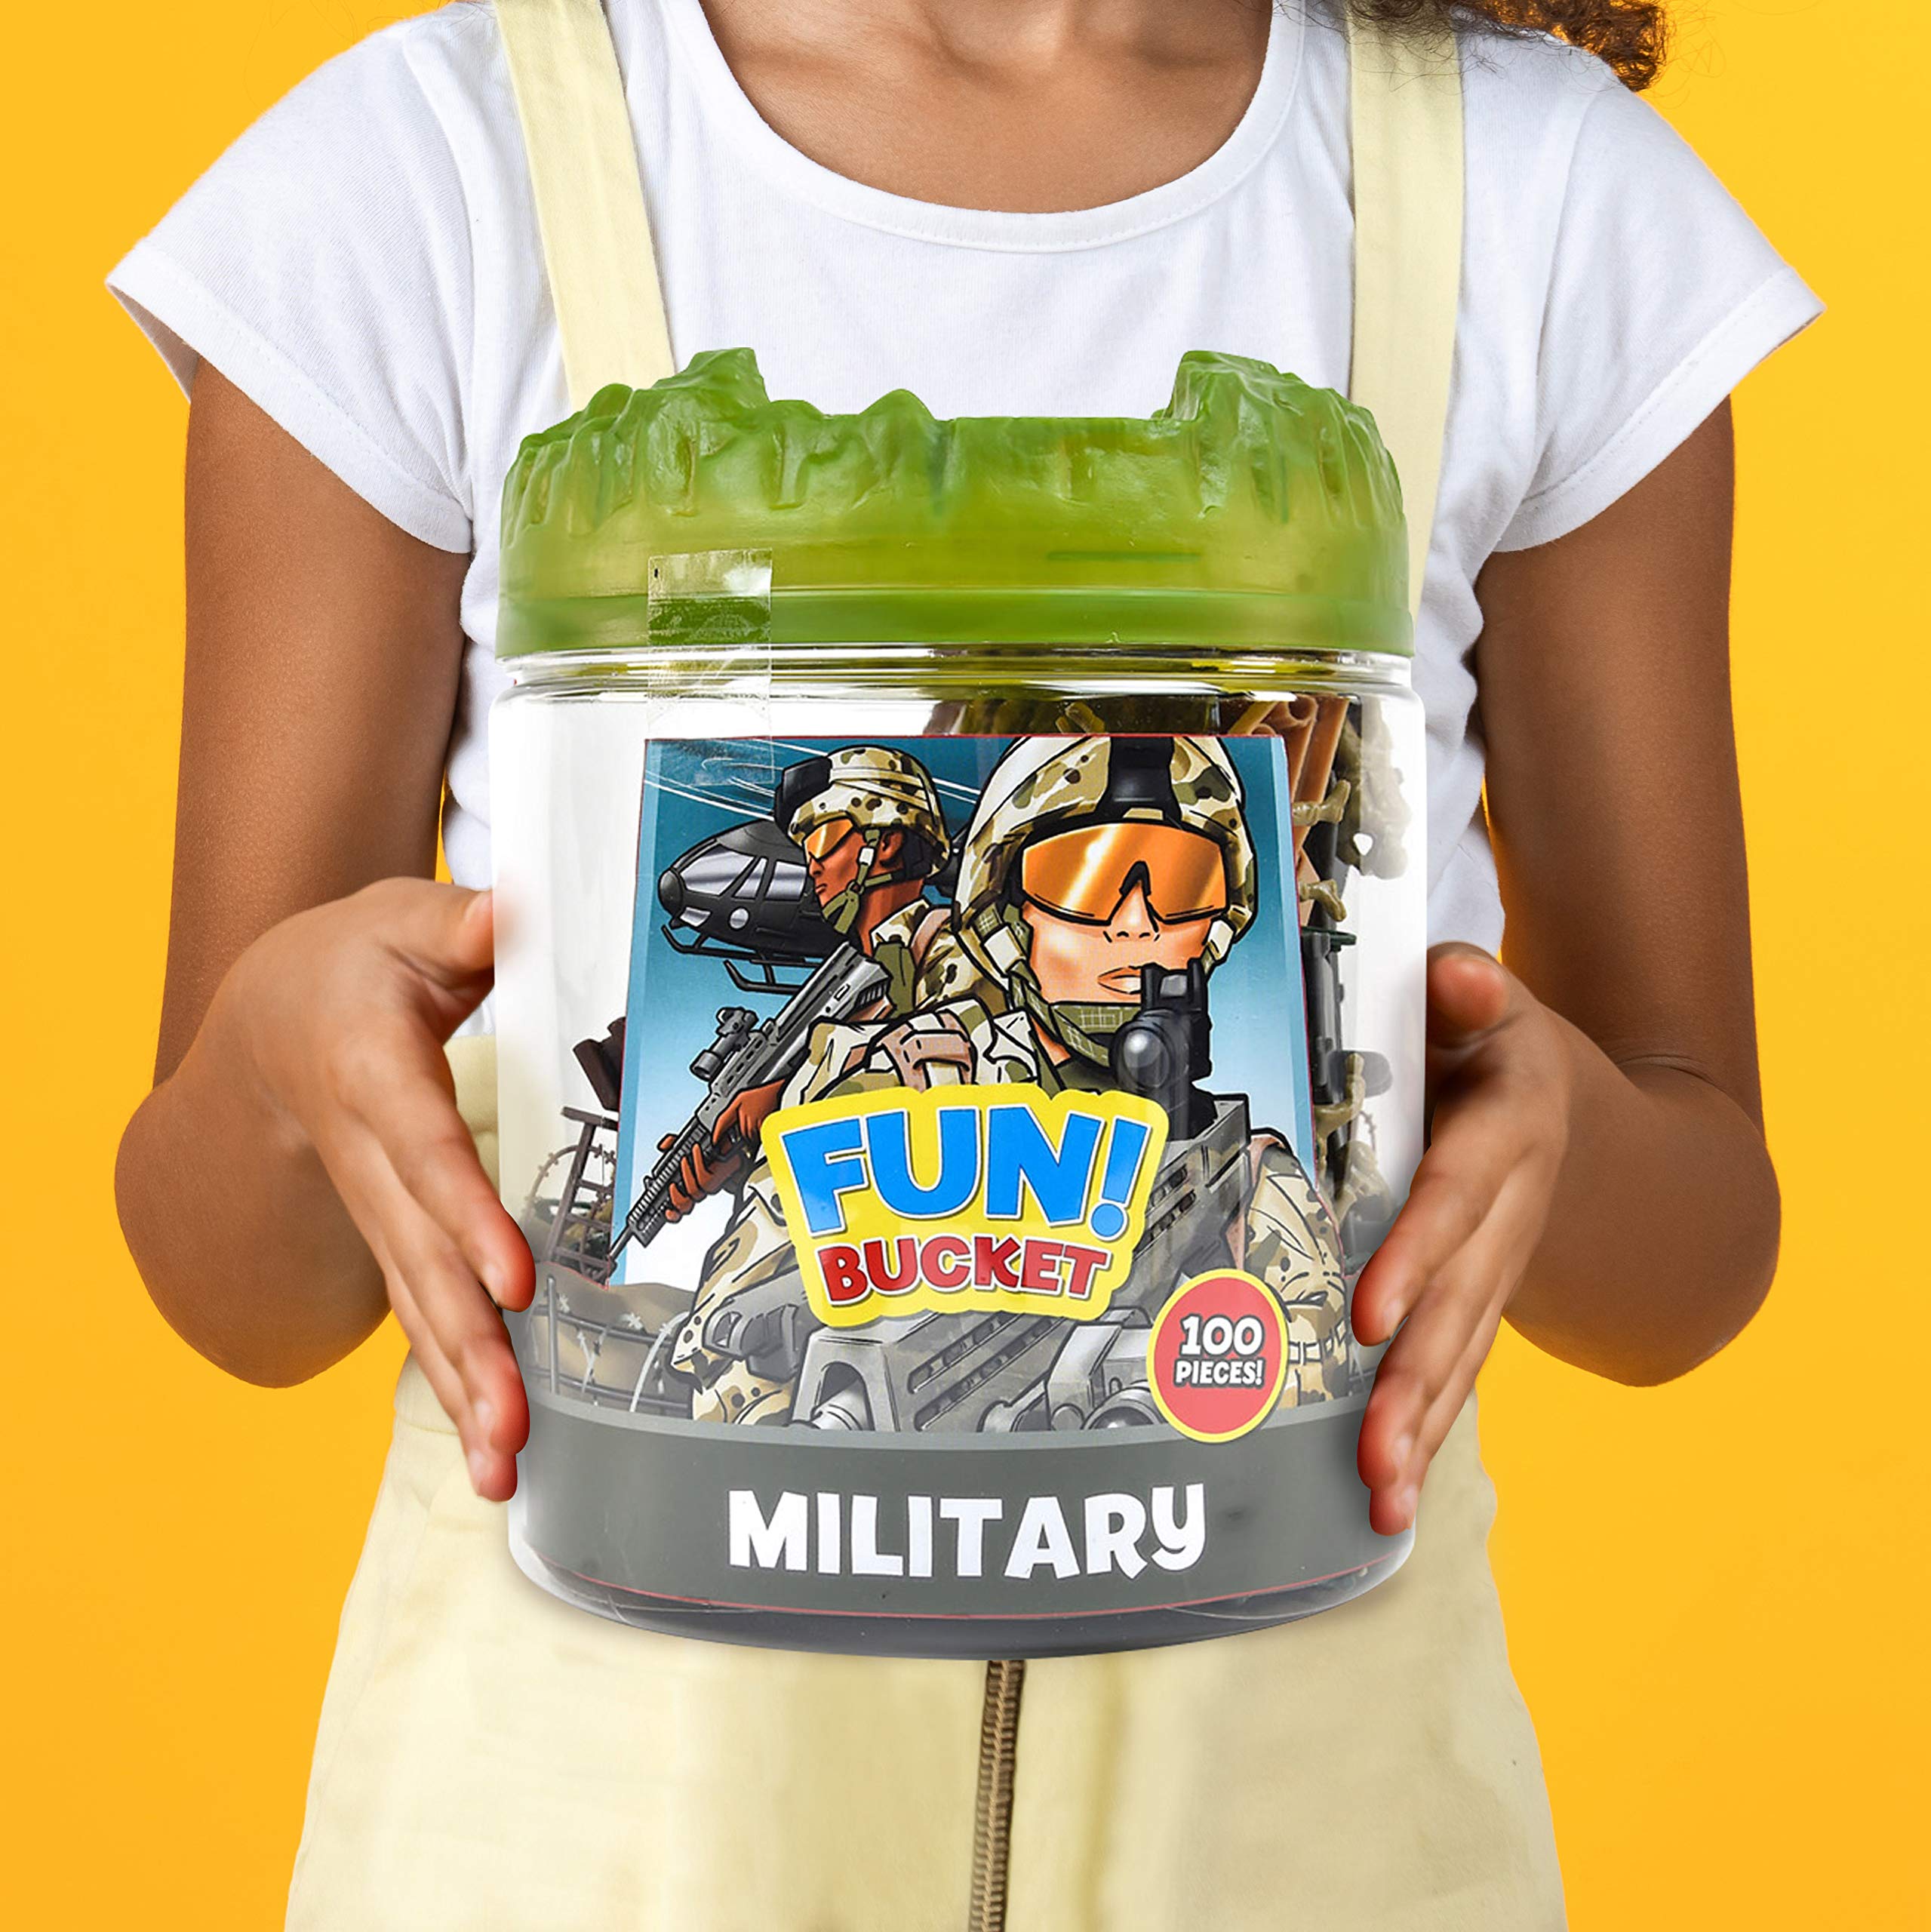 Sunny Days Entertainment Military Battle Group Bucket – 100 Assorted Soldiers and Accessories Toy Play Set for Kids, Boys and Girls | Plastic Army Men Figures with Storage Container